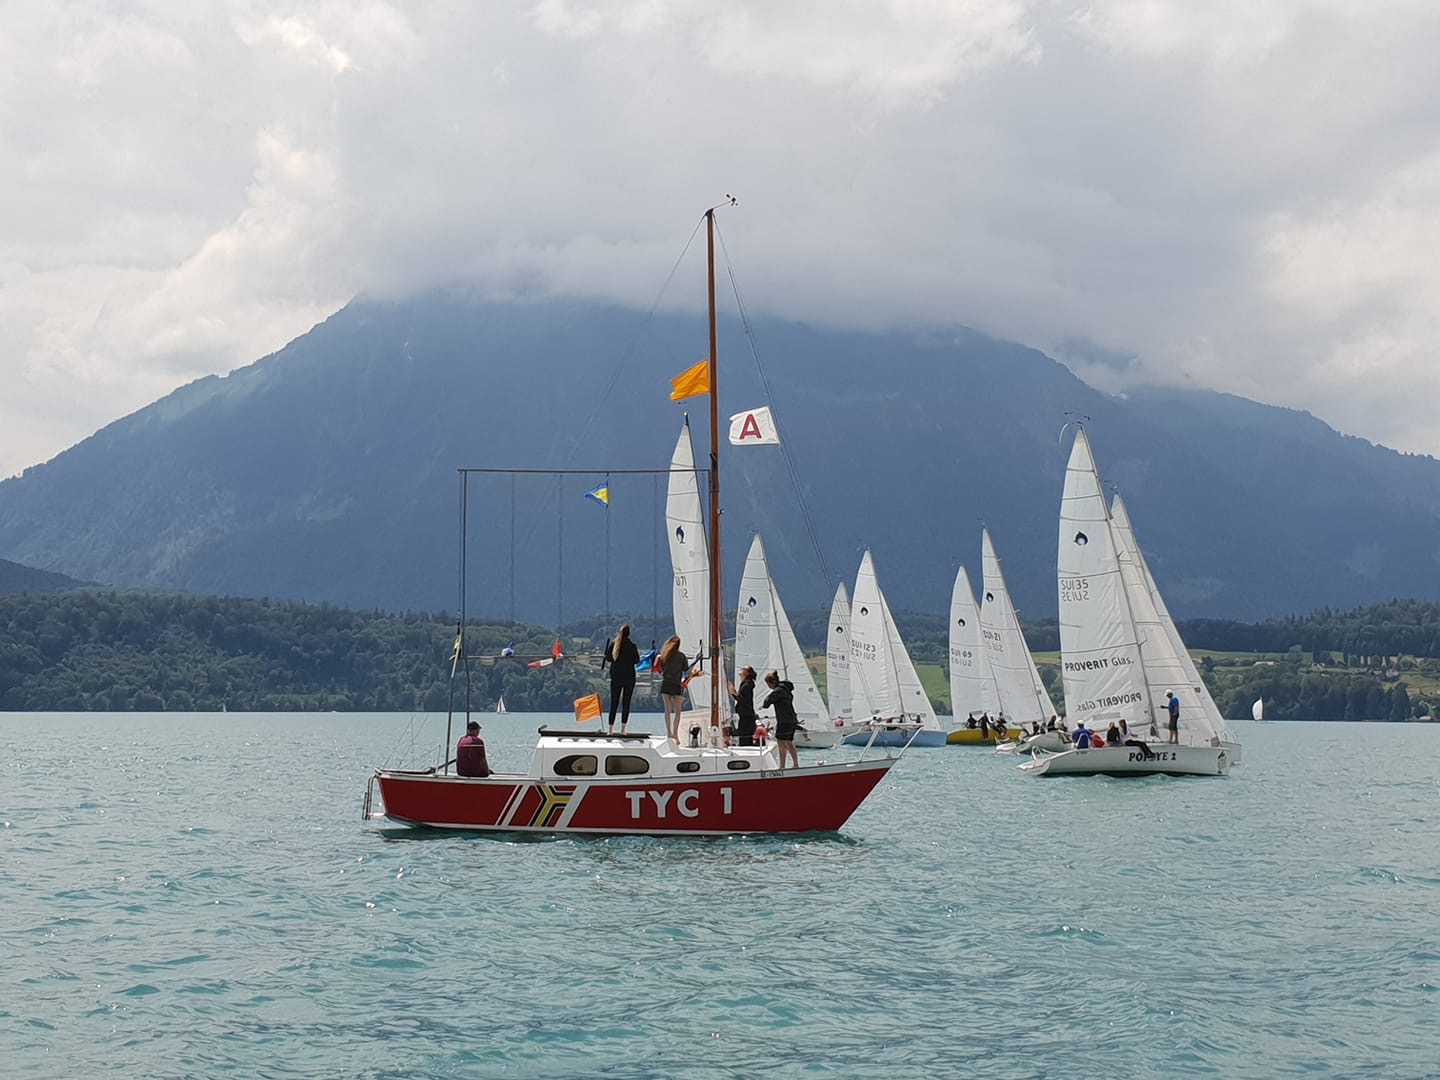  Dragon, Dolphin  JungfrauTrophy  Thunersee YC